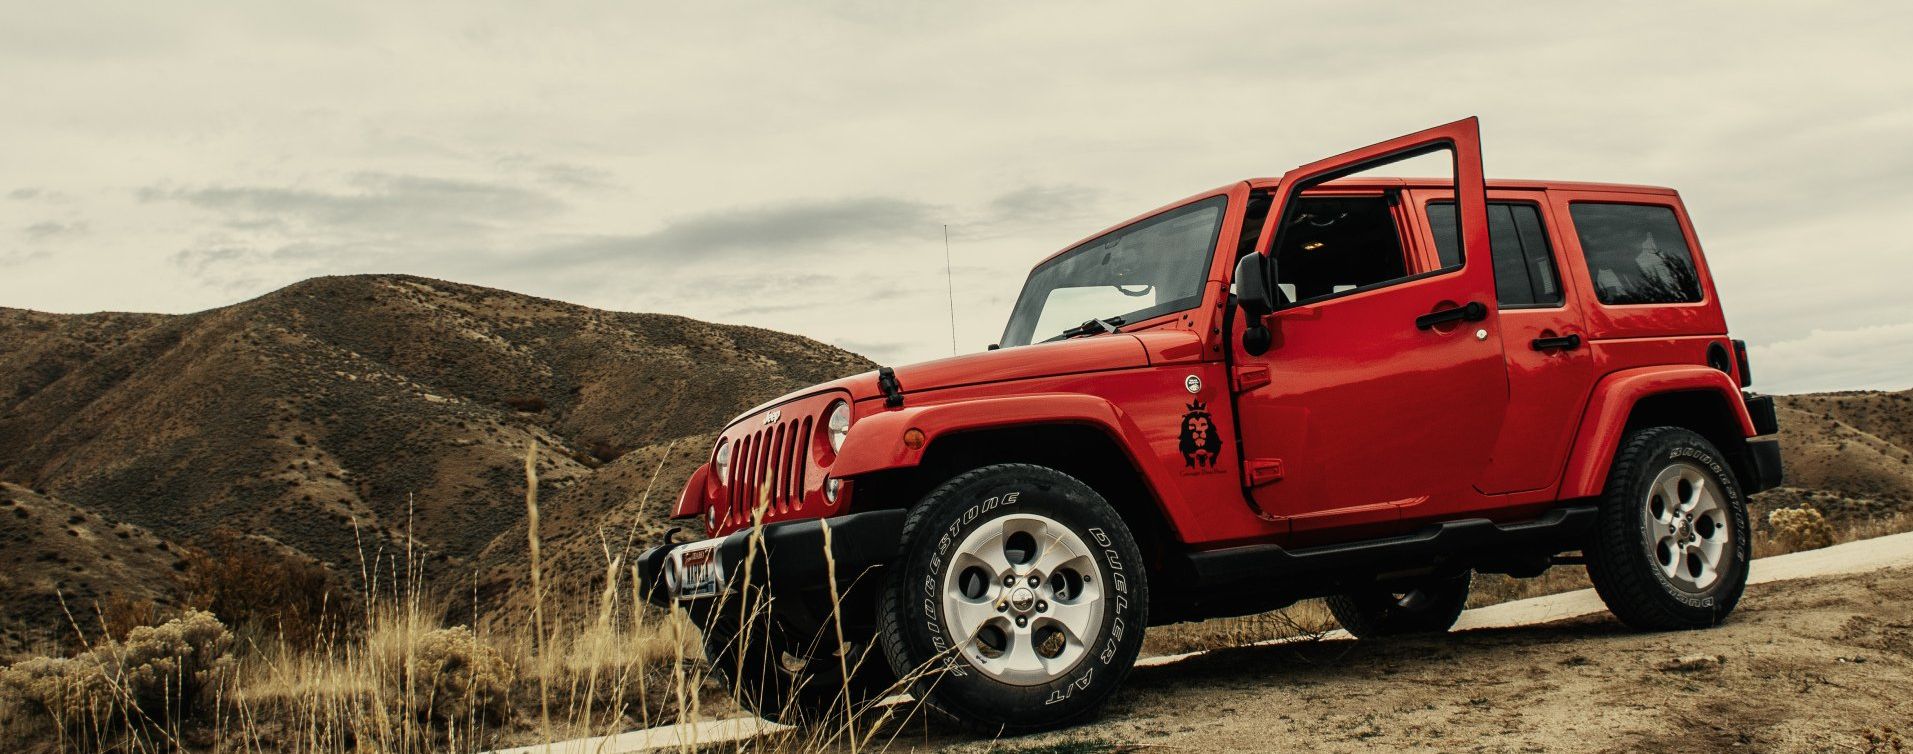 a red jeep is parked on the side of a dirt road .